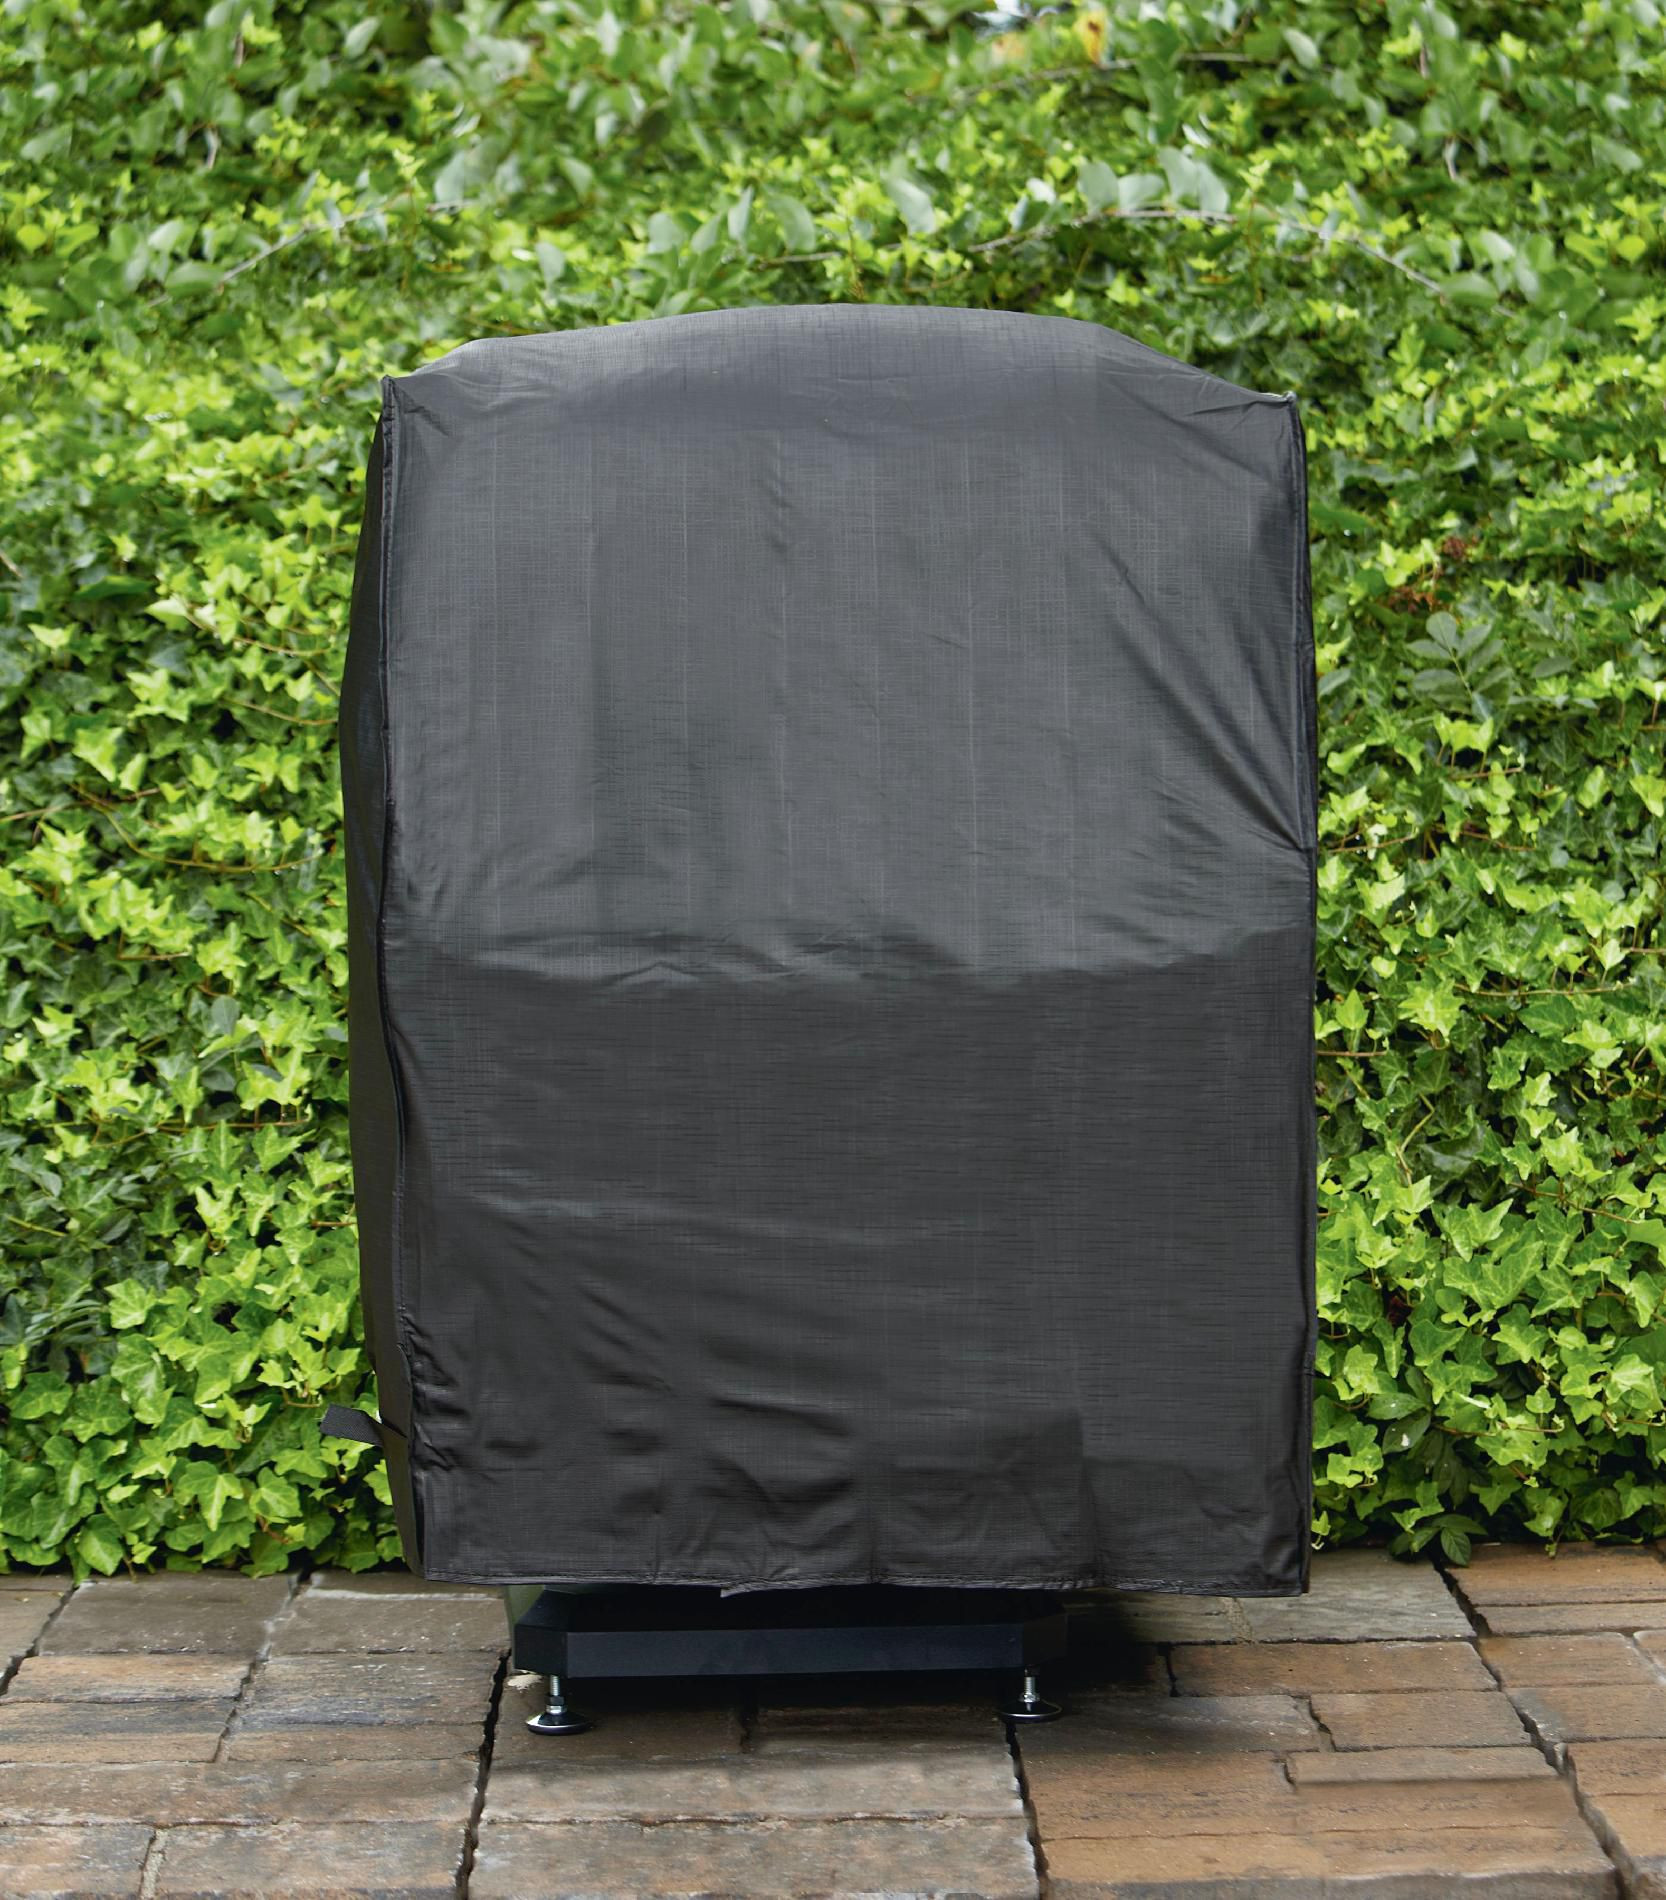 Backyard Grill Cover
 BBQ Pro Black Charcoal Grill Cover Fits 30" x 26" x 35"